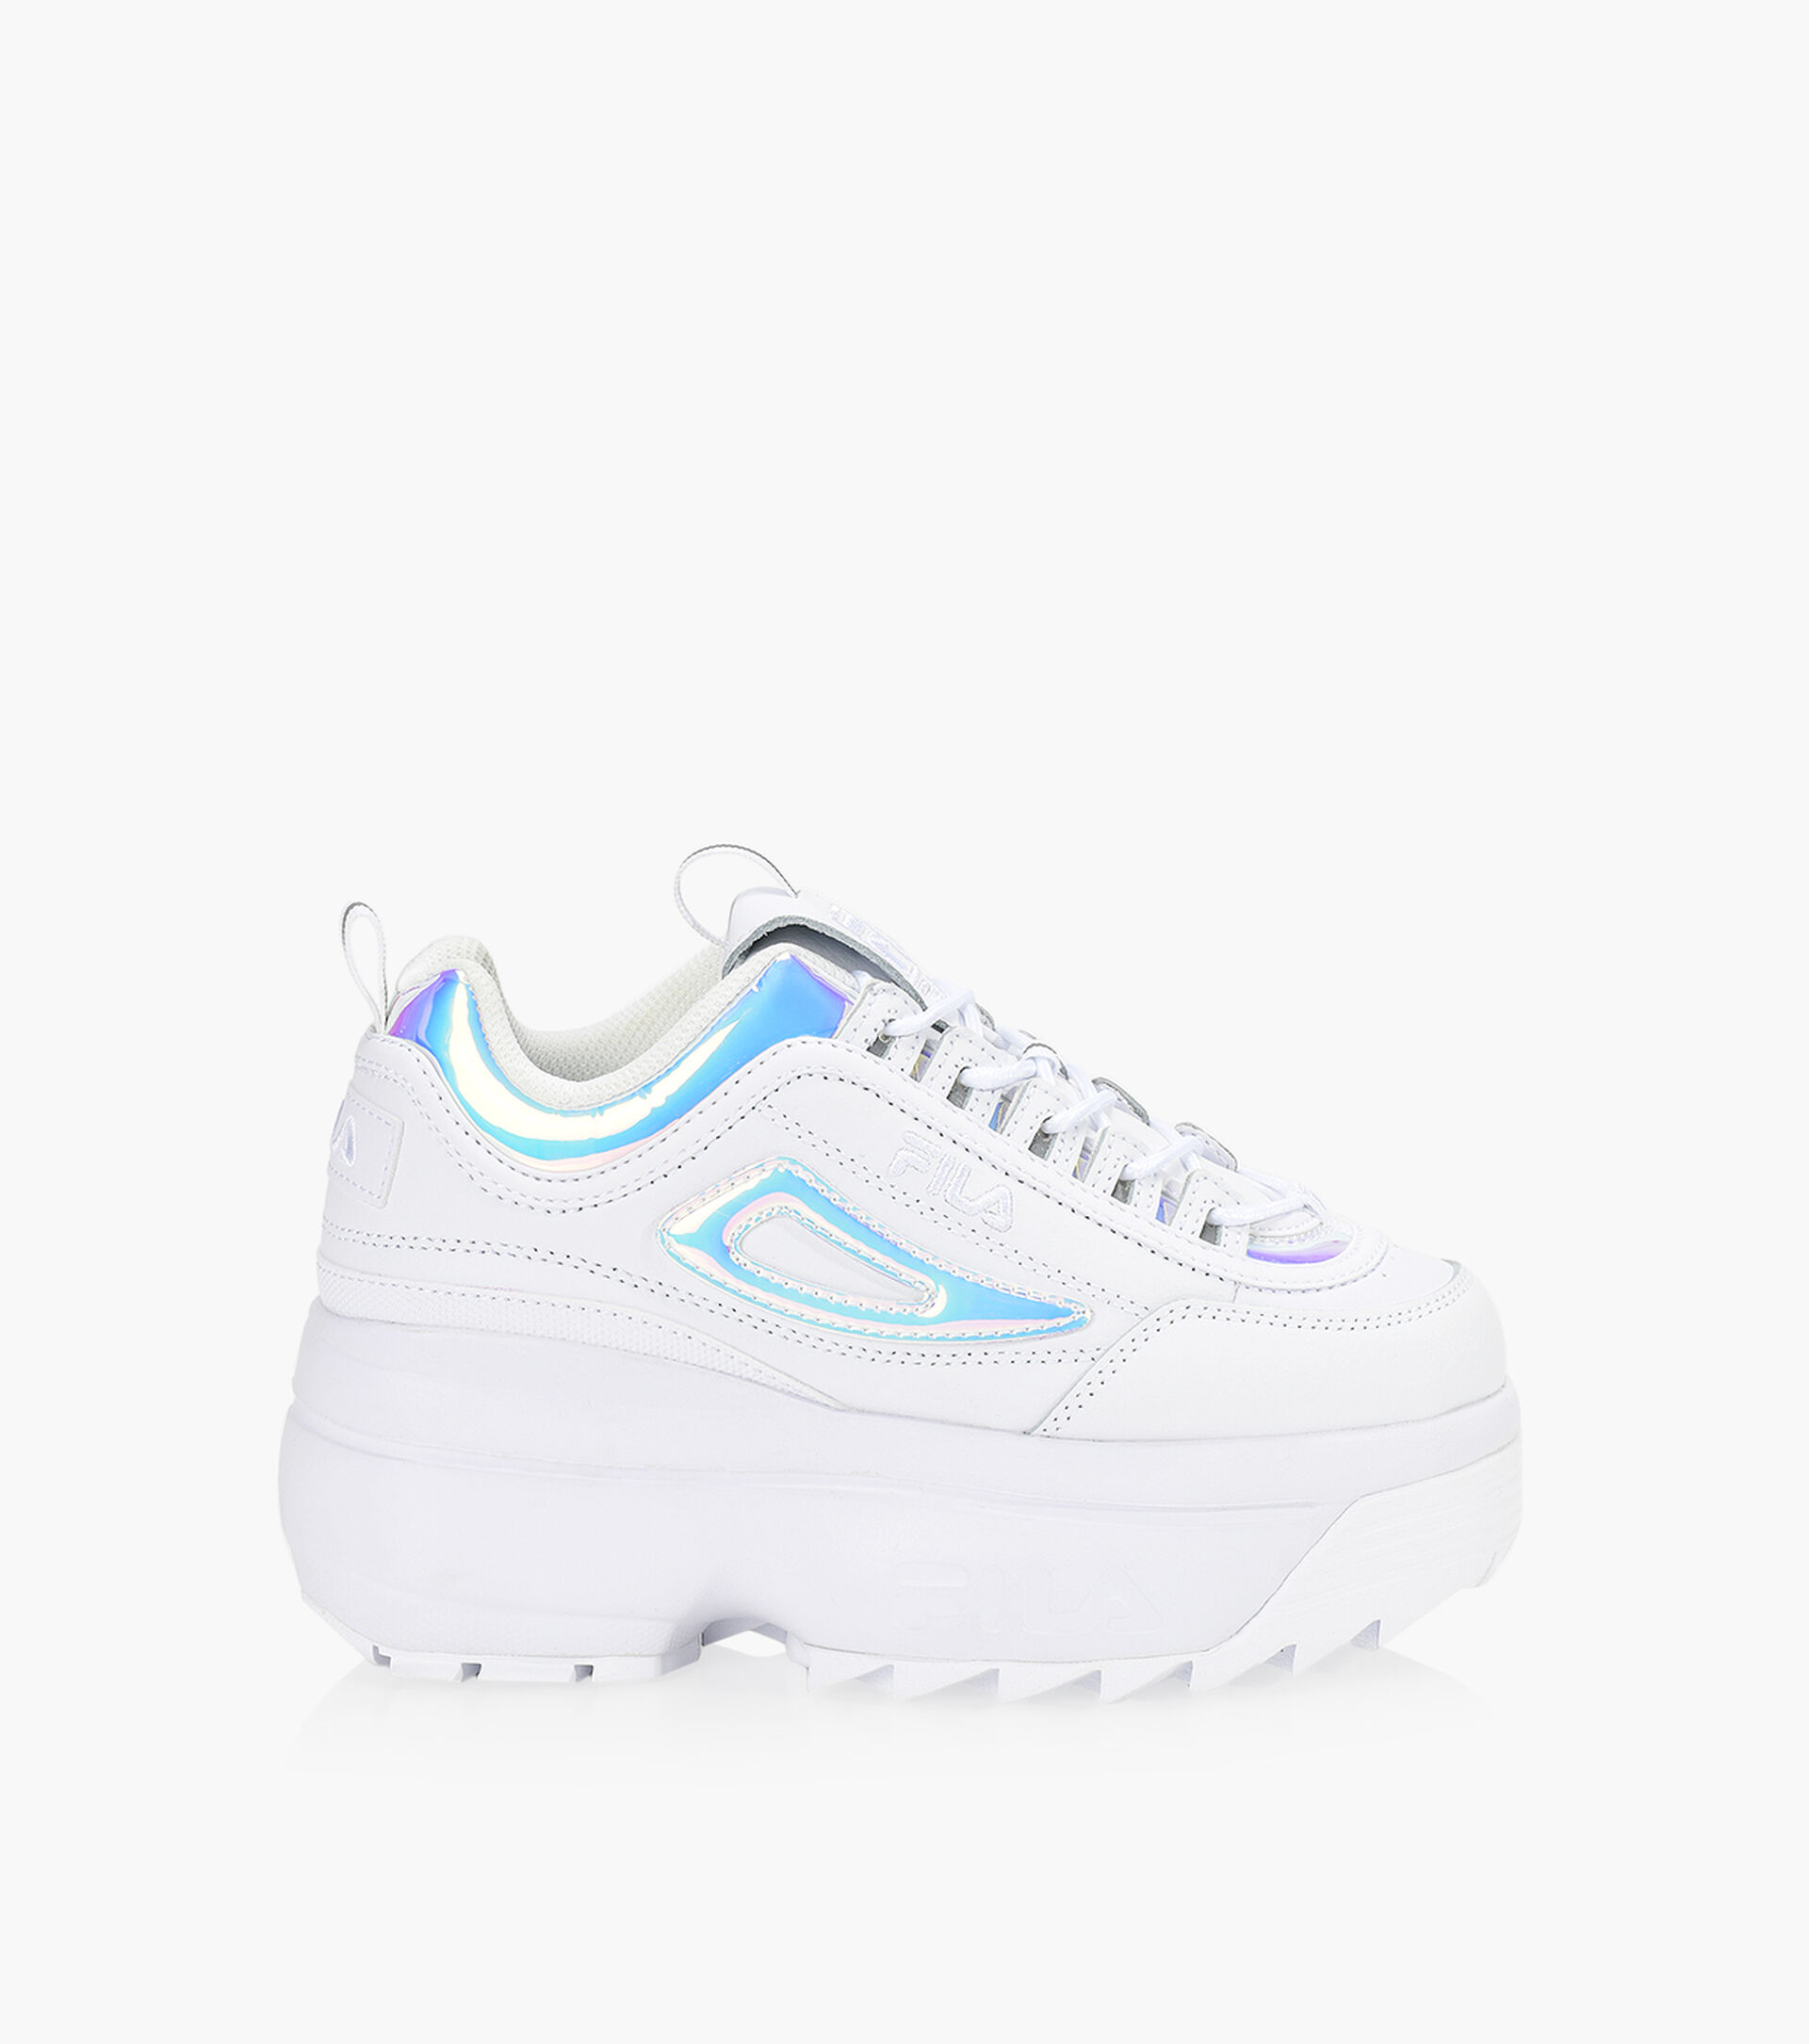 FILA DISRUPTOR 2 WEDGE IRIDESCENT - Cuir Blanc | Browns Shoes